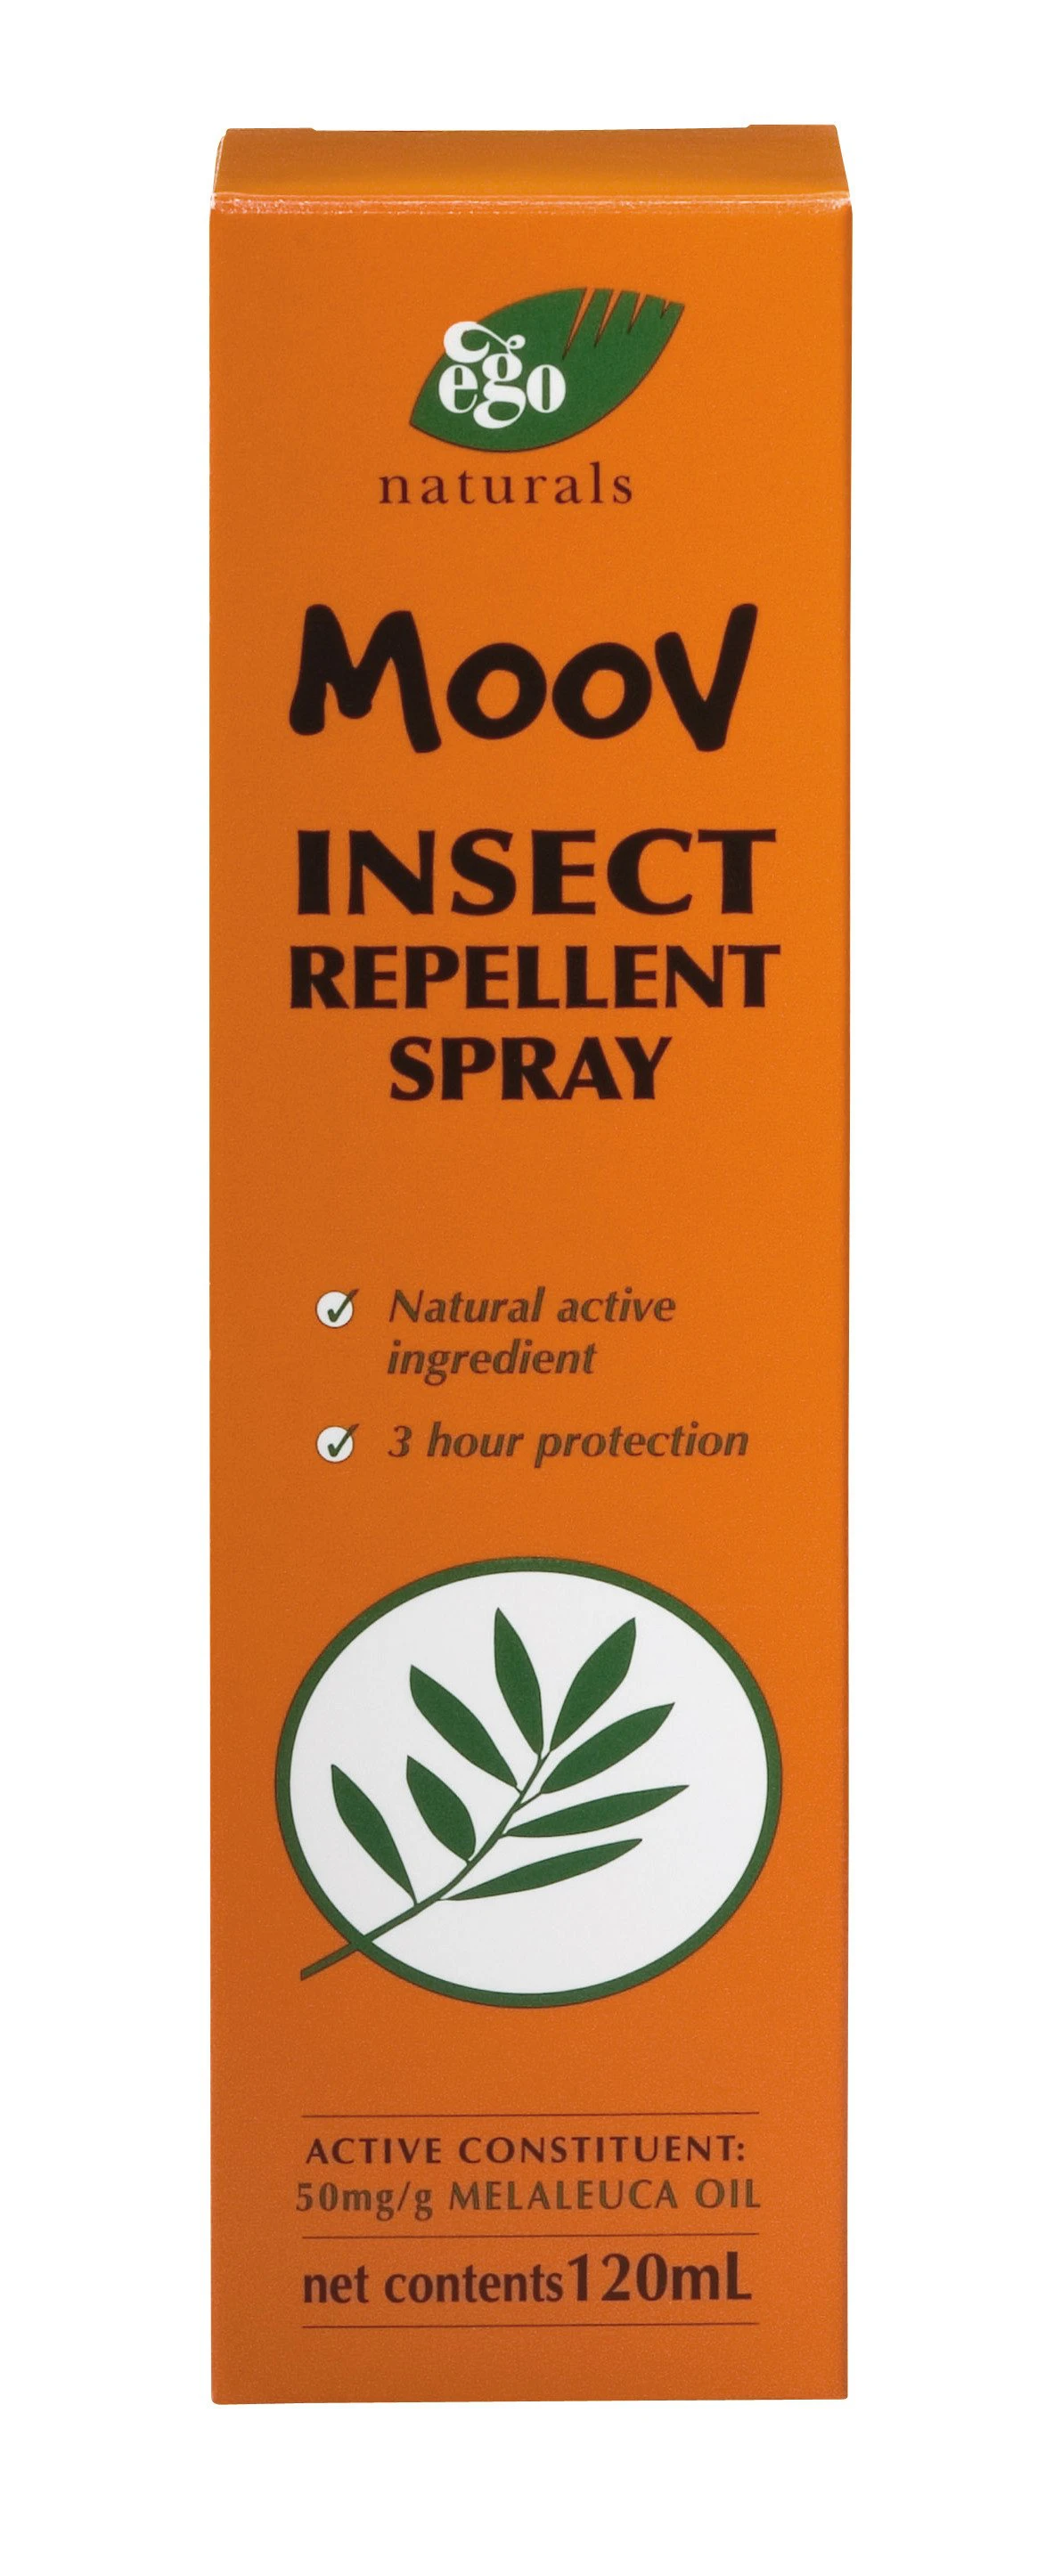 moov insect repellent spray